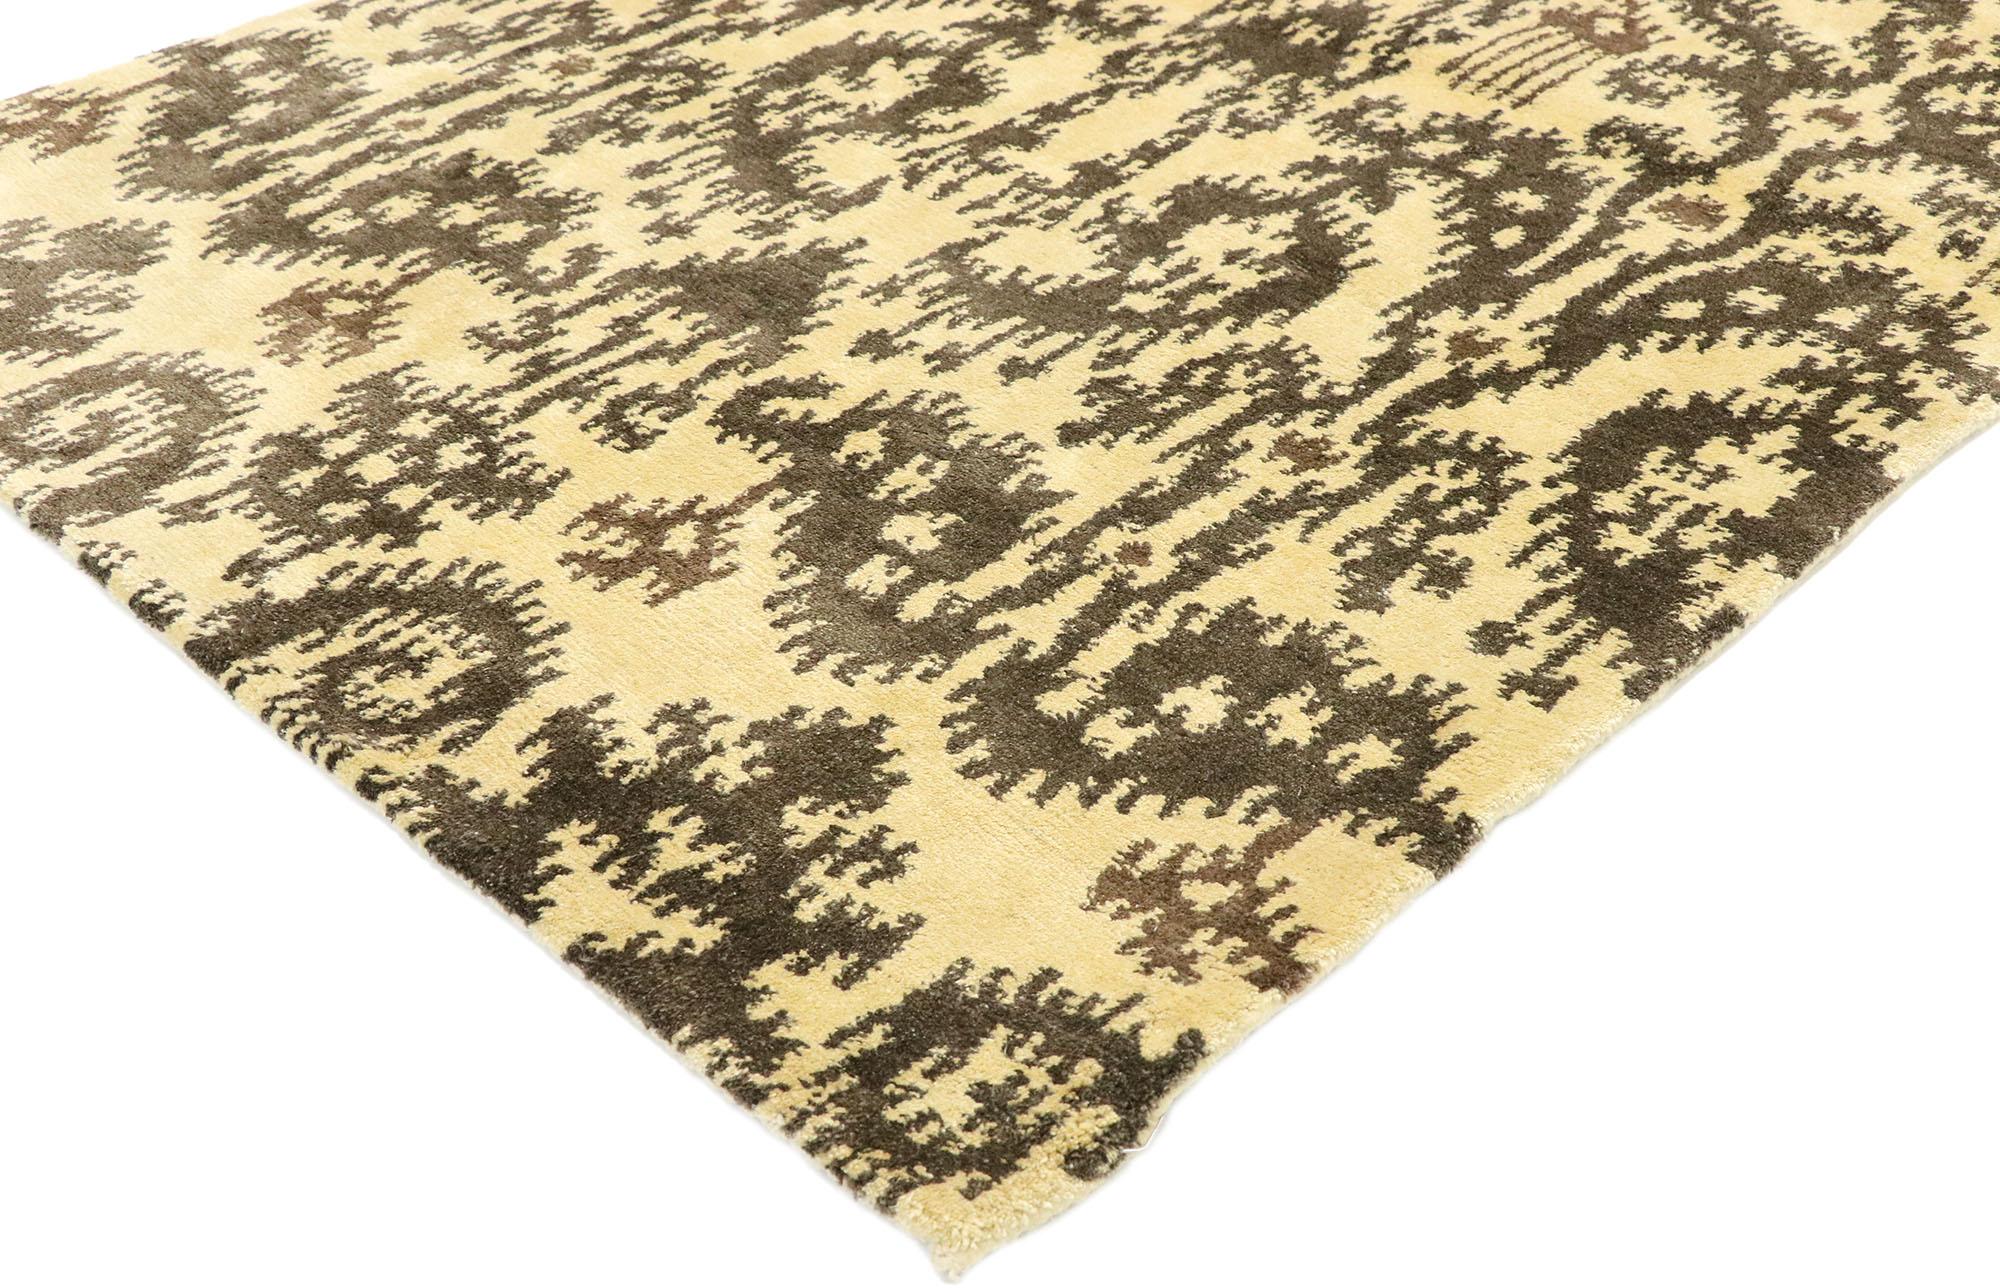 30239, new transitional Ikat rug with warm, earth-tones and modern style, accent rug. Balancing a timeless design and neutral colors, this hand-knotted wool transitional Ikat rug beautifully displays modern style. The tan abrashed field is covered